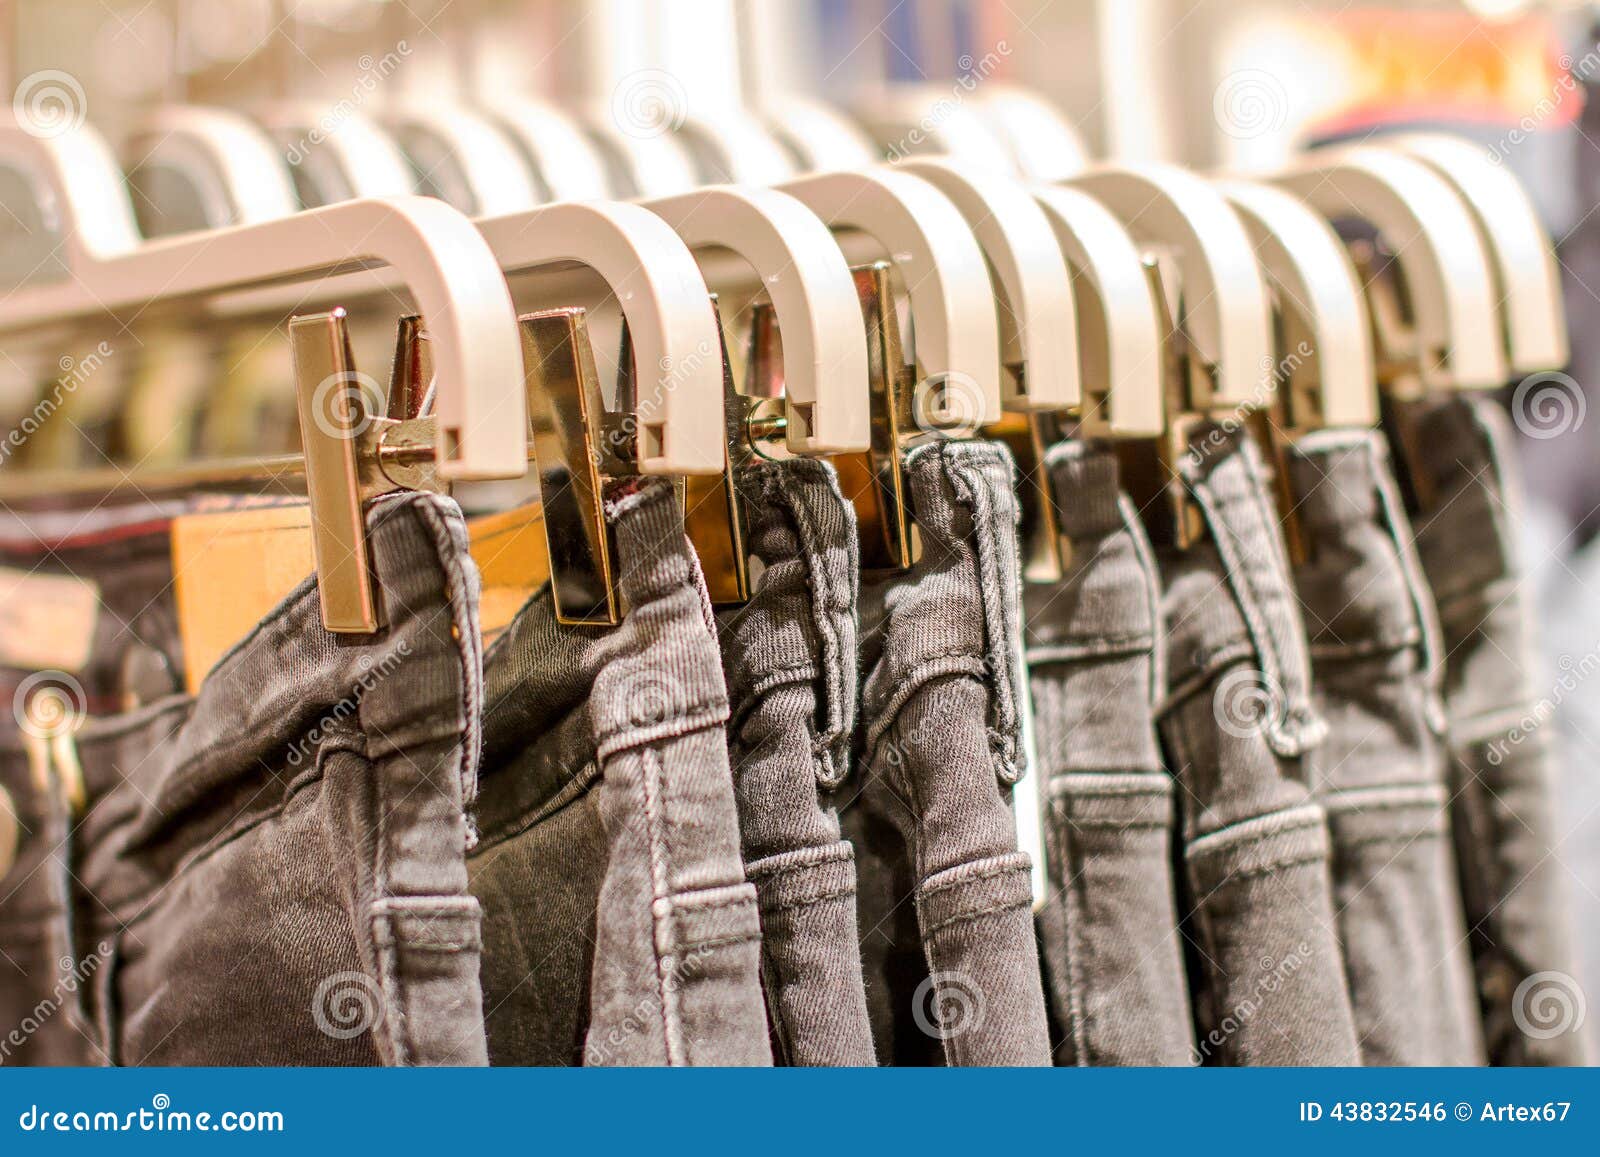 Easily Keep Jeans On The Clothes Hanger